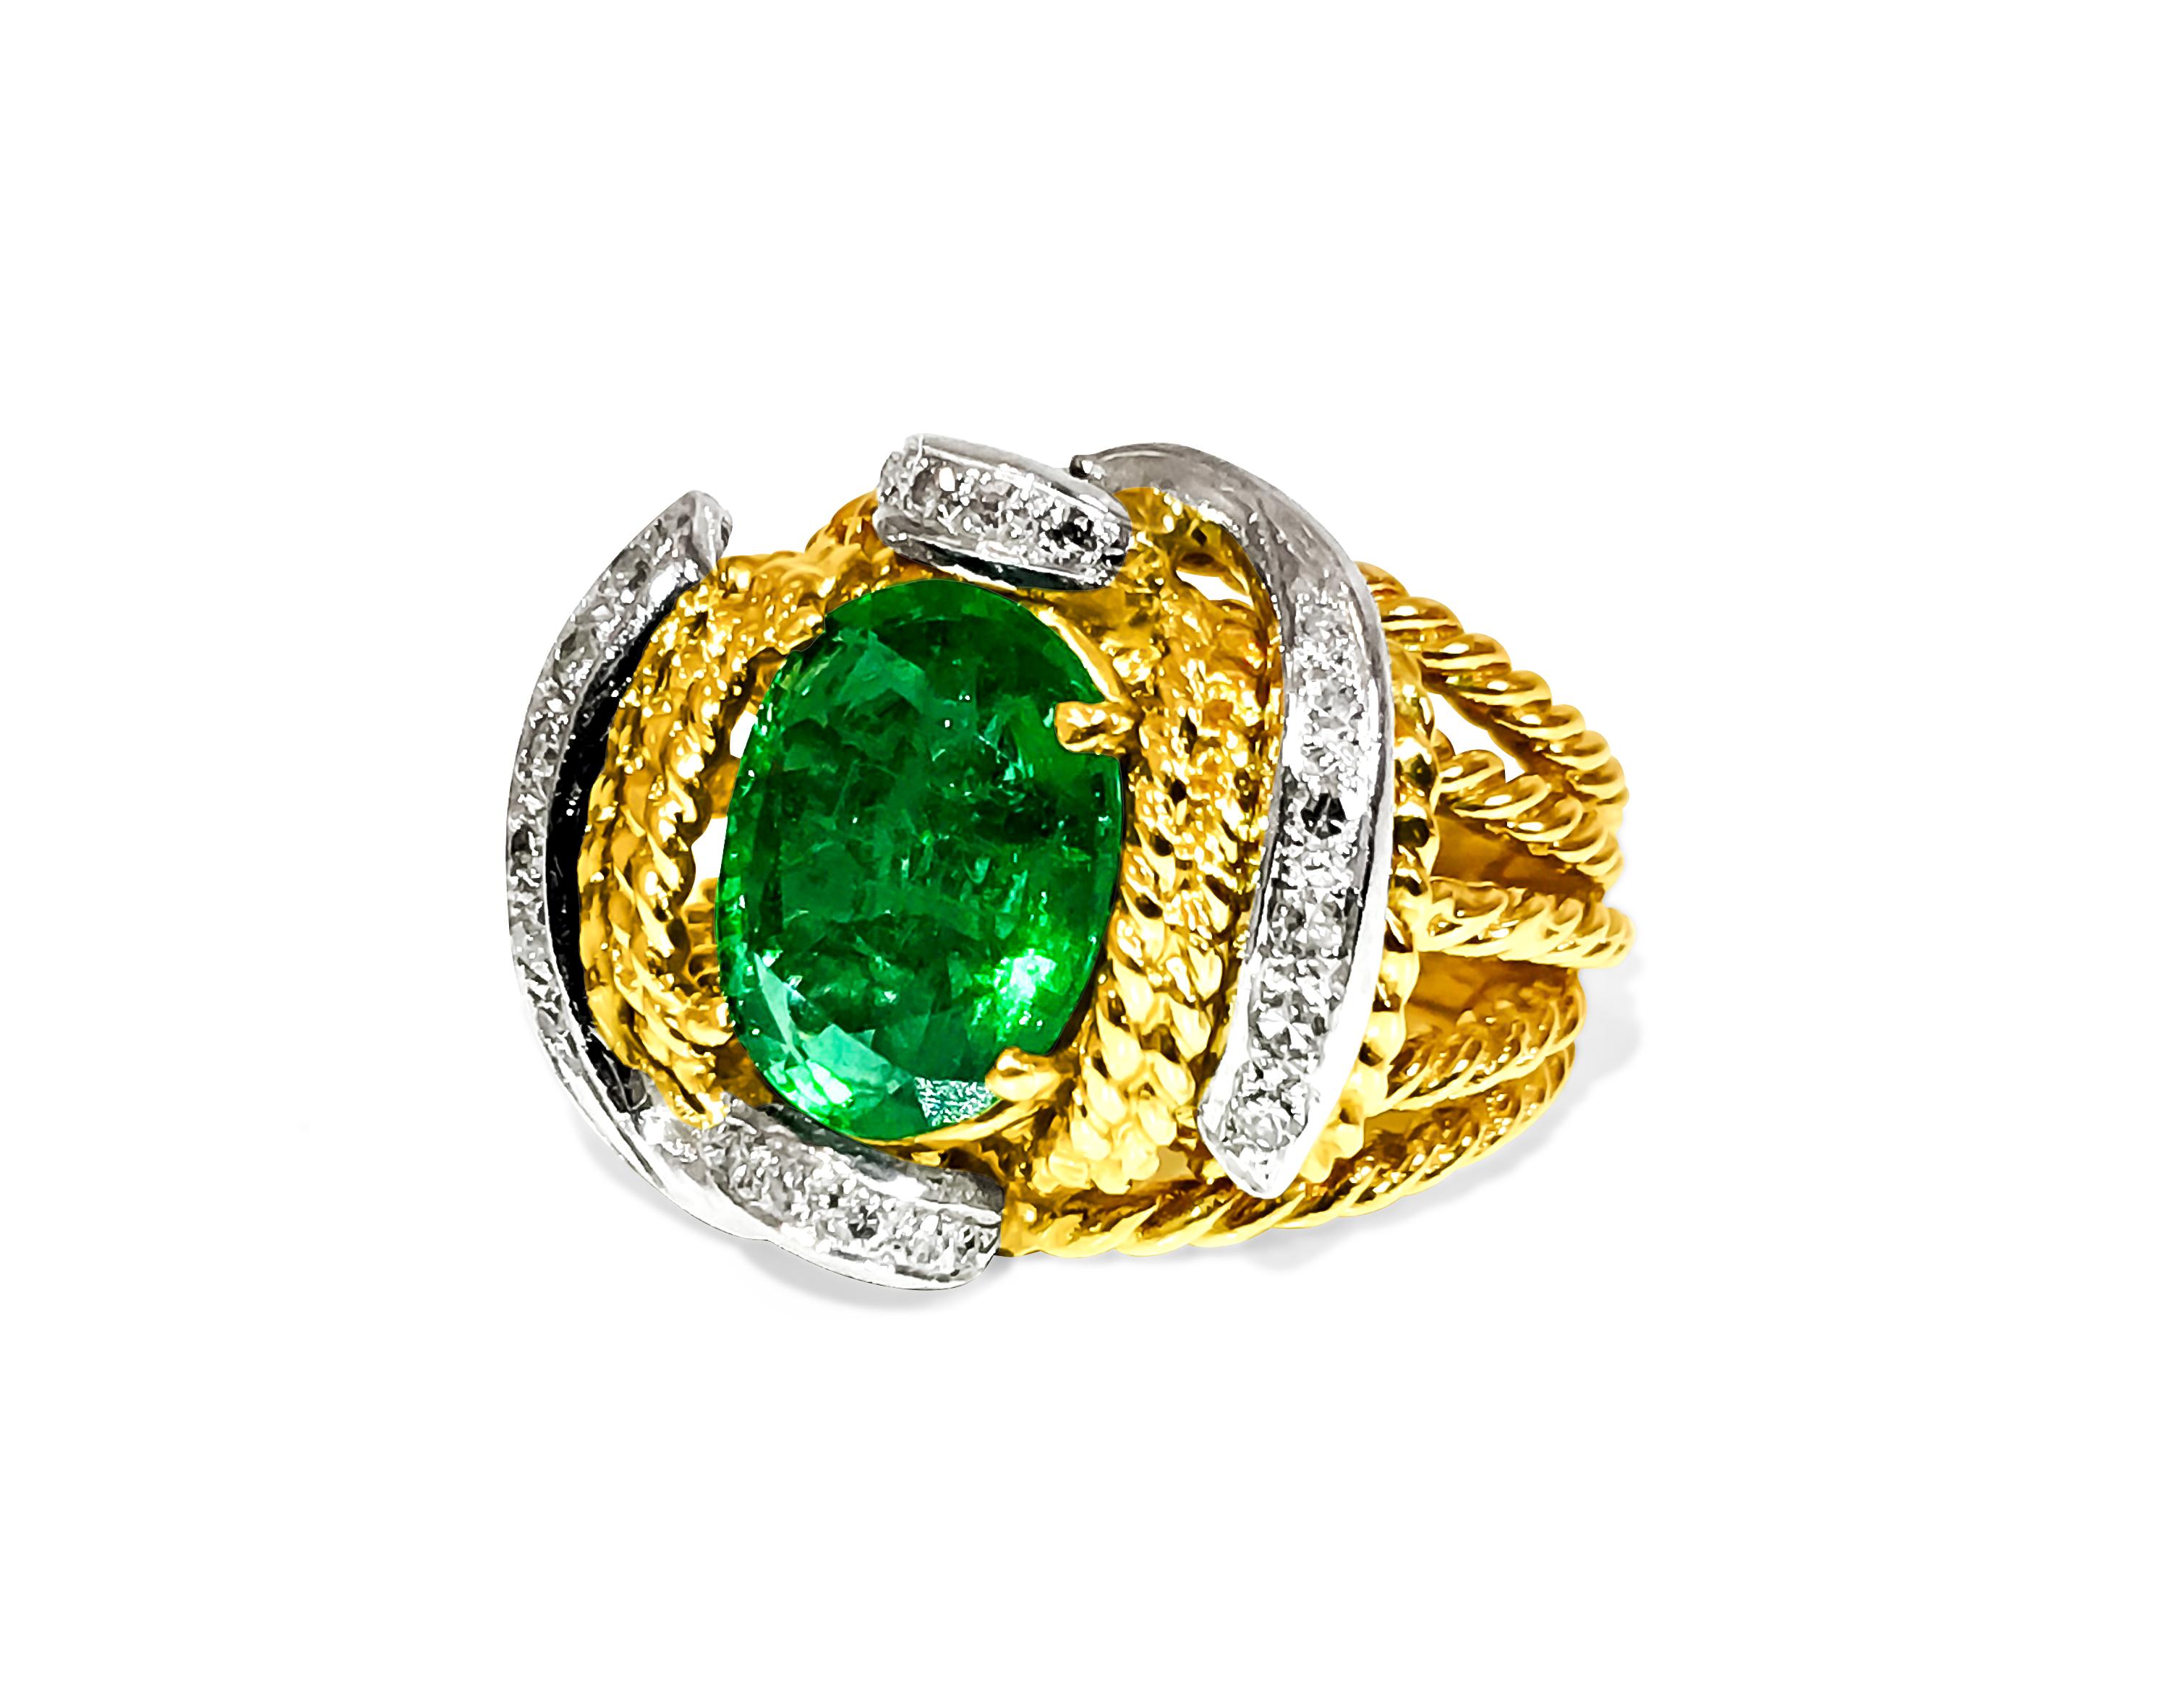 Natural 3.86 Carat Emerald Diamond Ring 18K Gold In Excellent Condition For Sale In Miami, FL